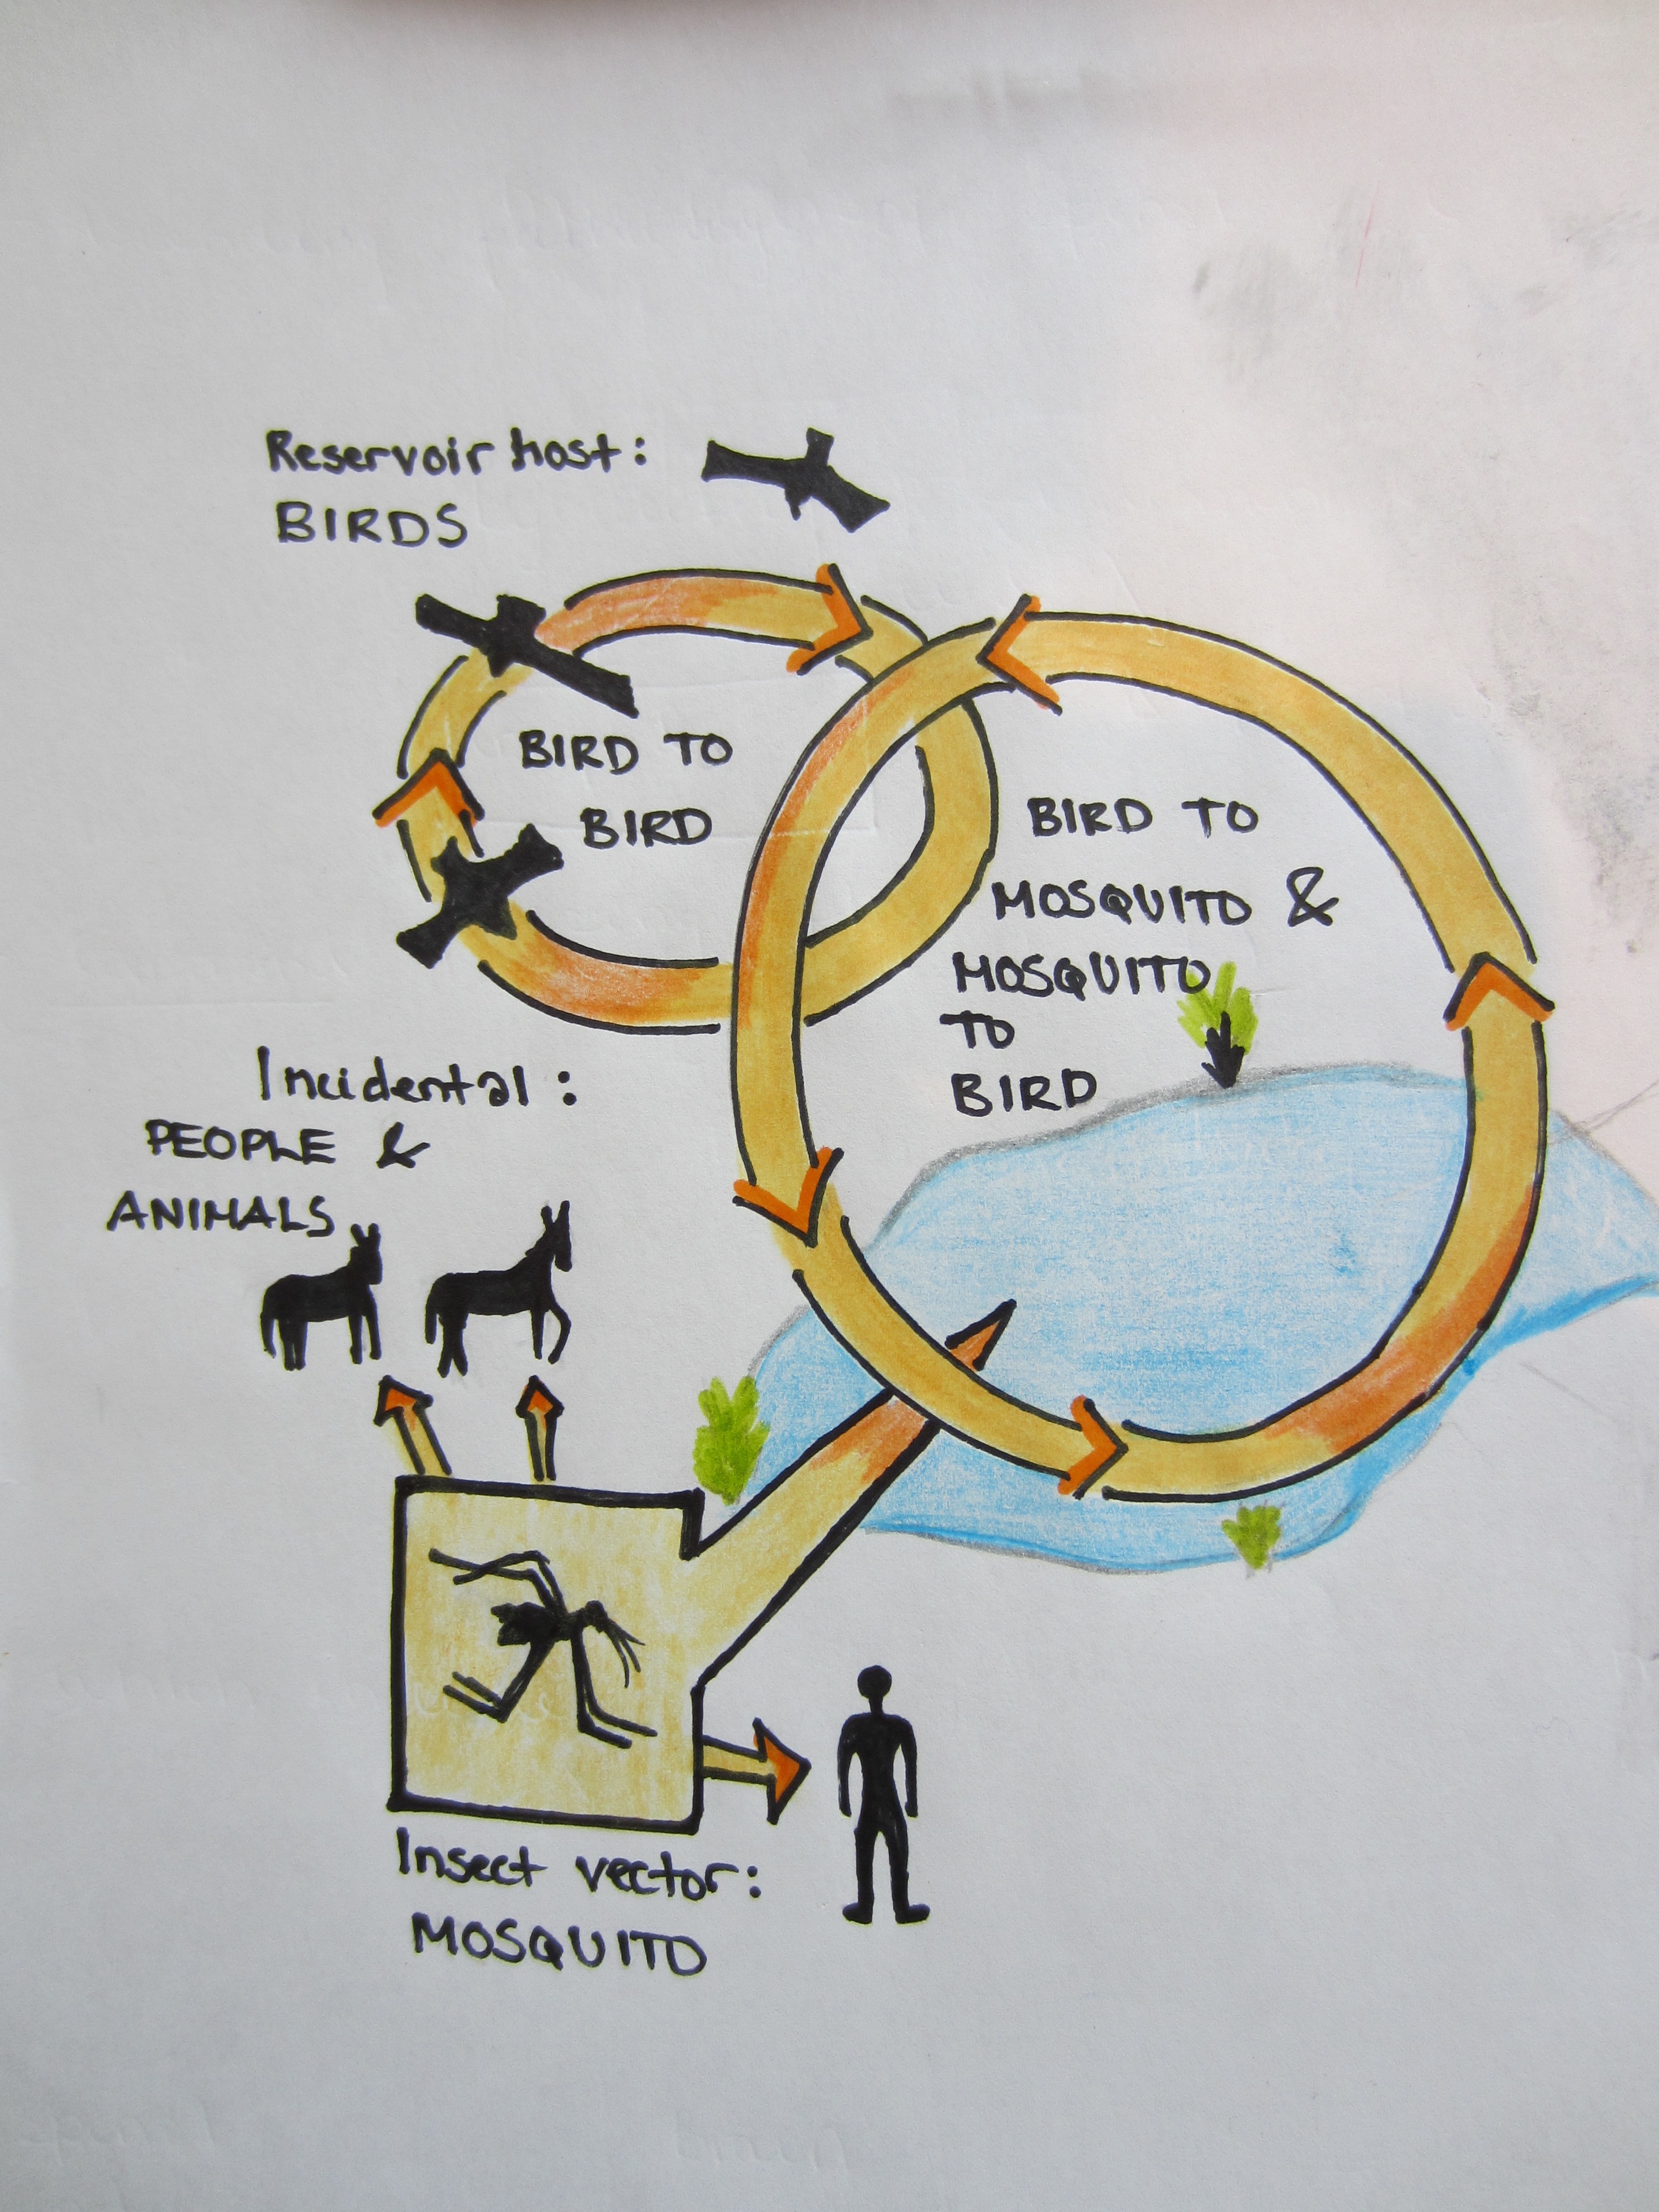 Transmission cycle of the West Nile Virus